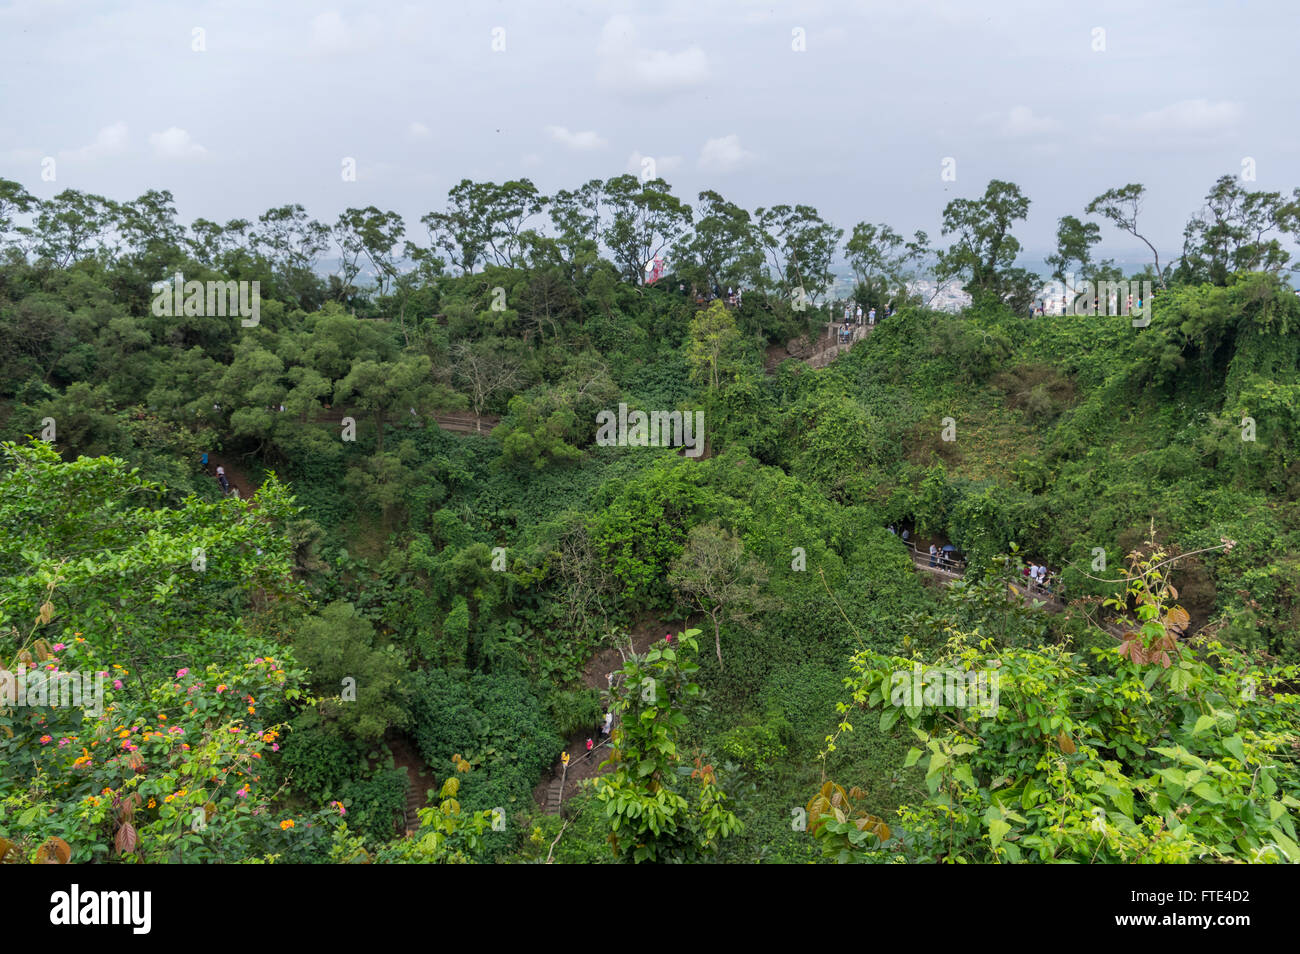 Fengluling volcano crater, covered by tropical rainforest, at the Haikou Volcanic Cluster Global Geopark, Hainan, China. Stock Photo